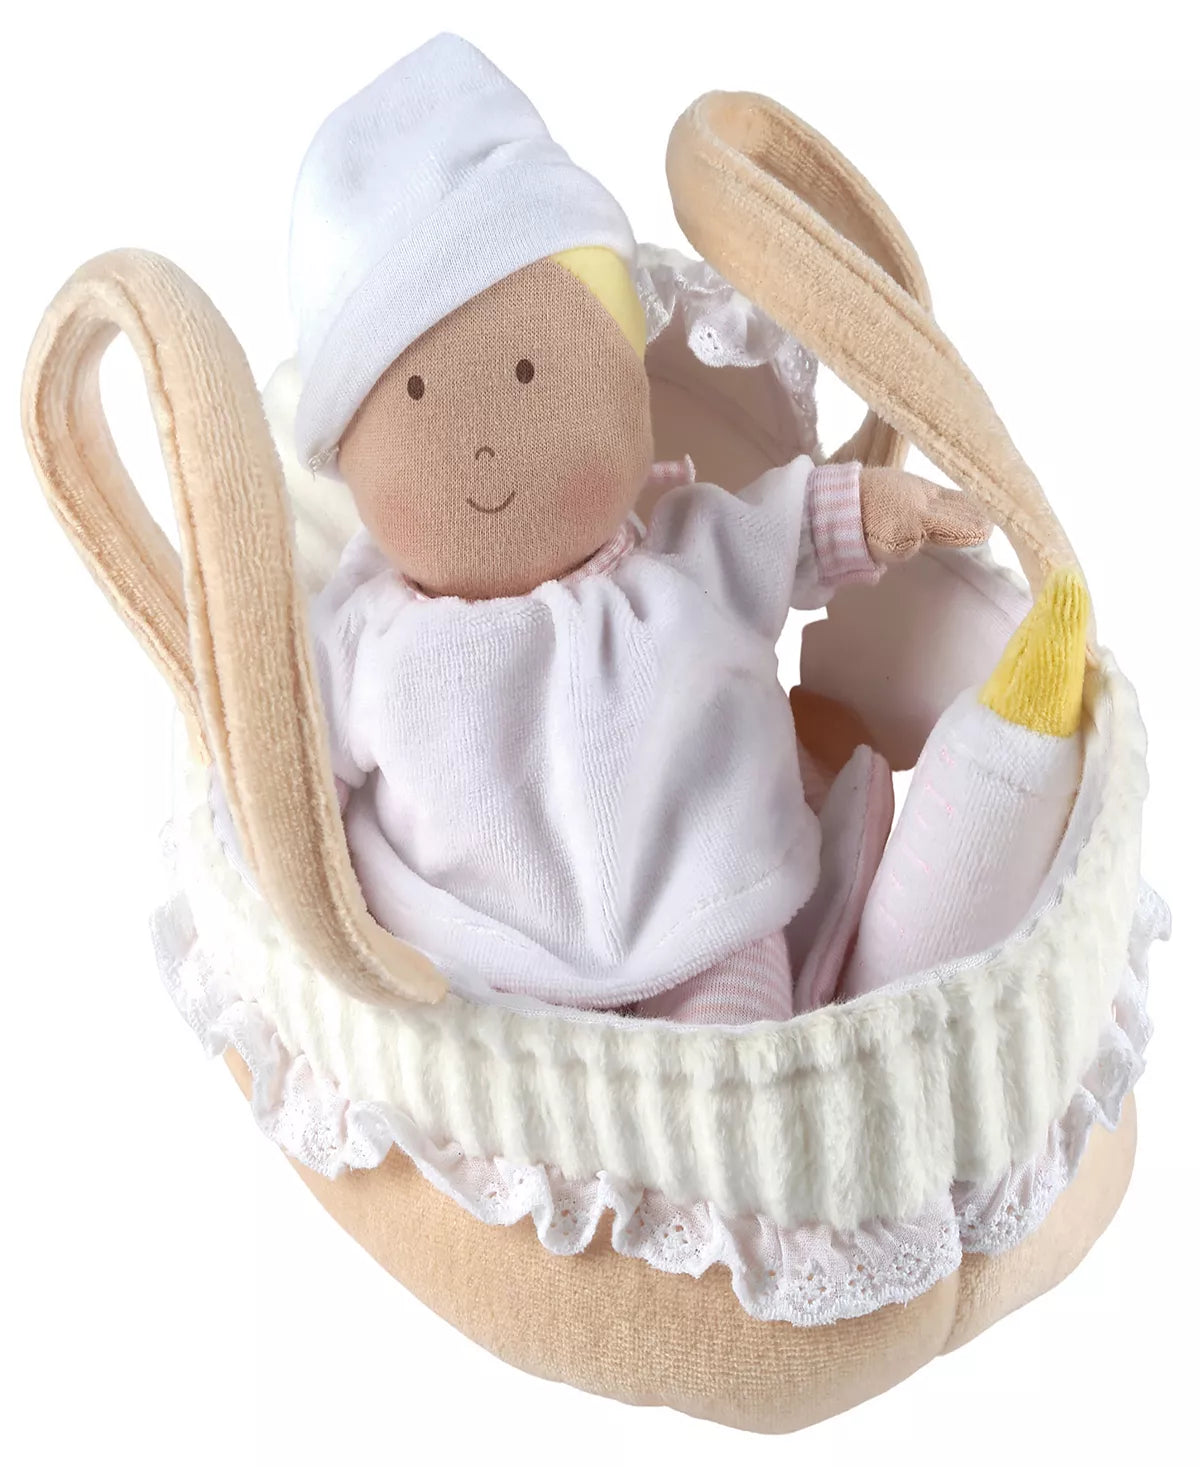 Baby Soft Doll with Carry Cot, Bottle and Blanket